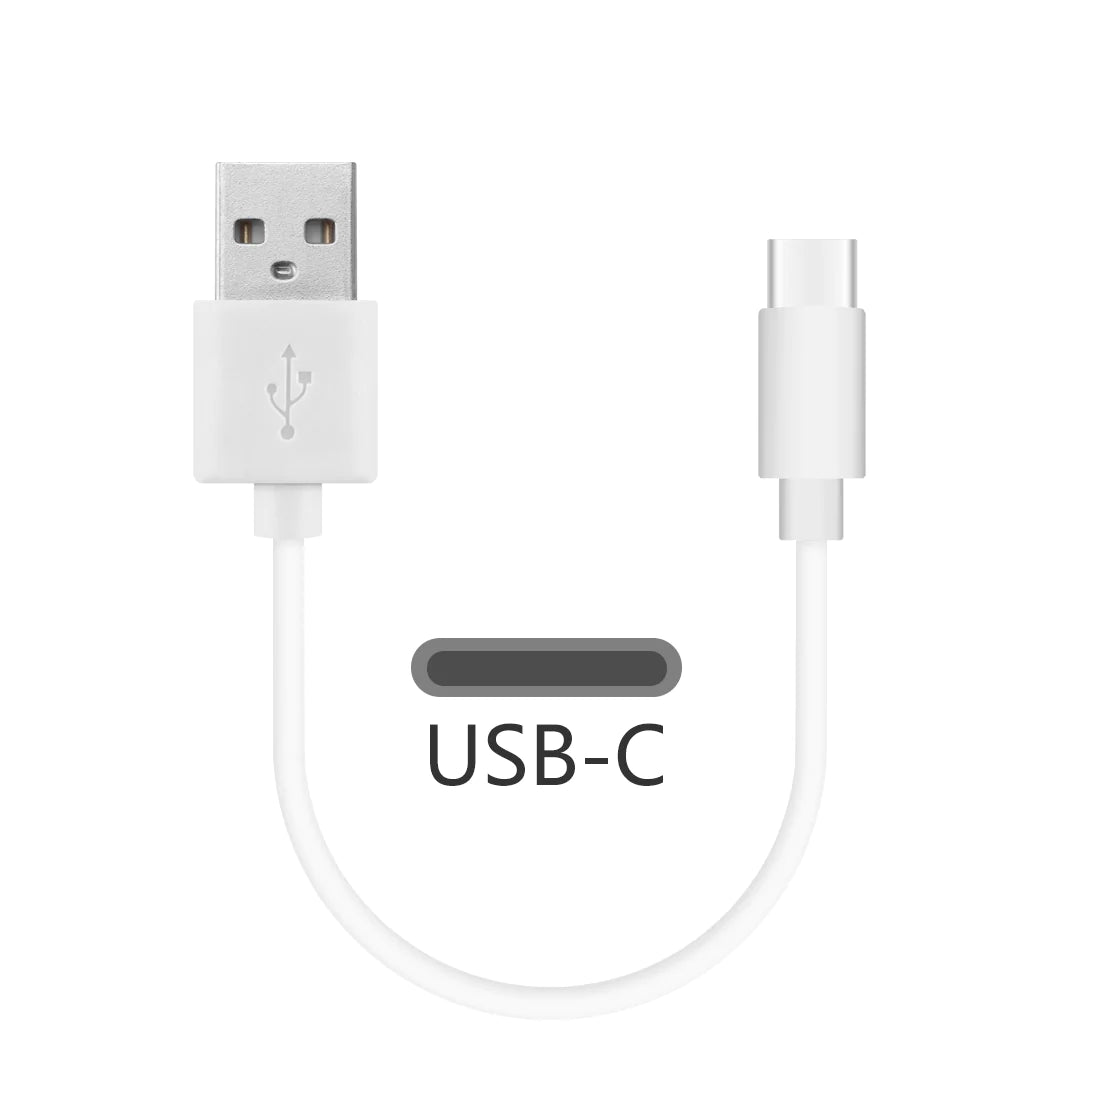 4-pack of Short Charging Cables, Cords - USB-C, Lightning, Micro USB available